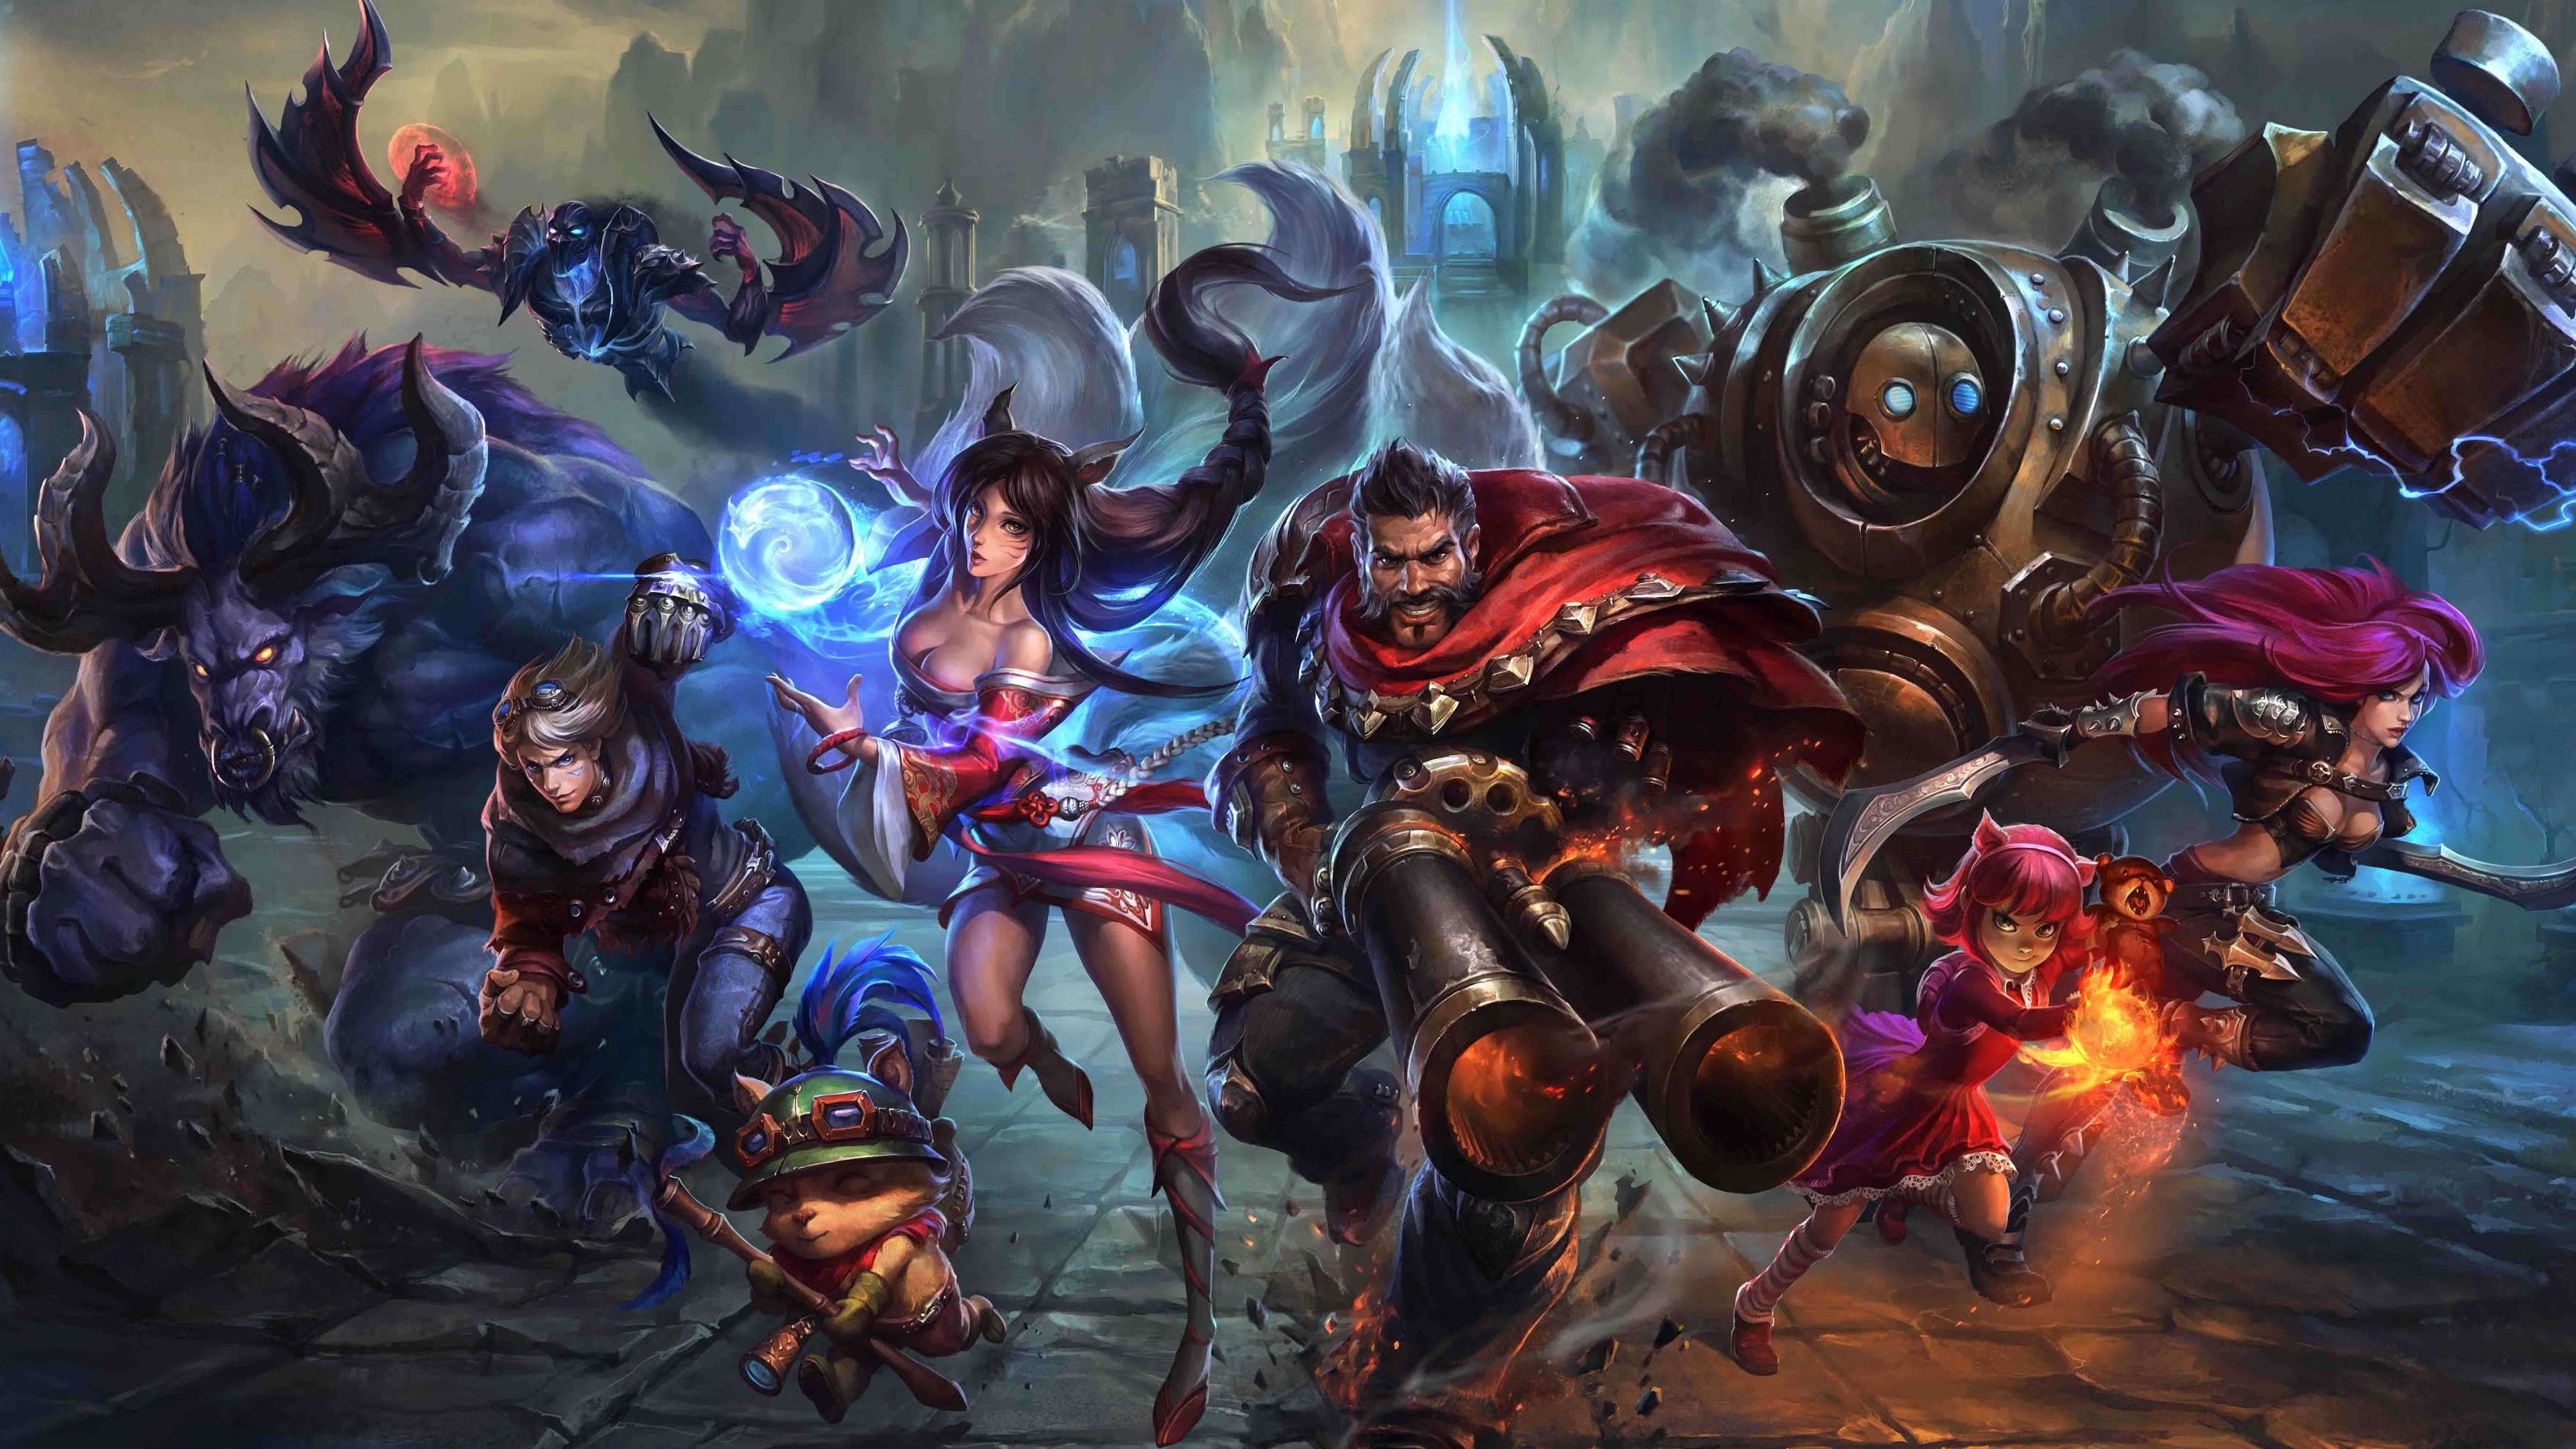 The Ultimate Guide To League Of Legends